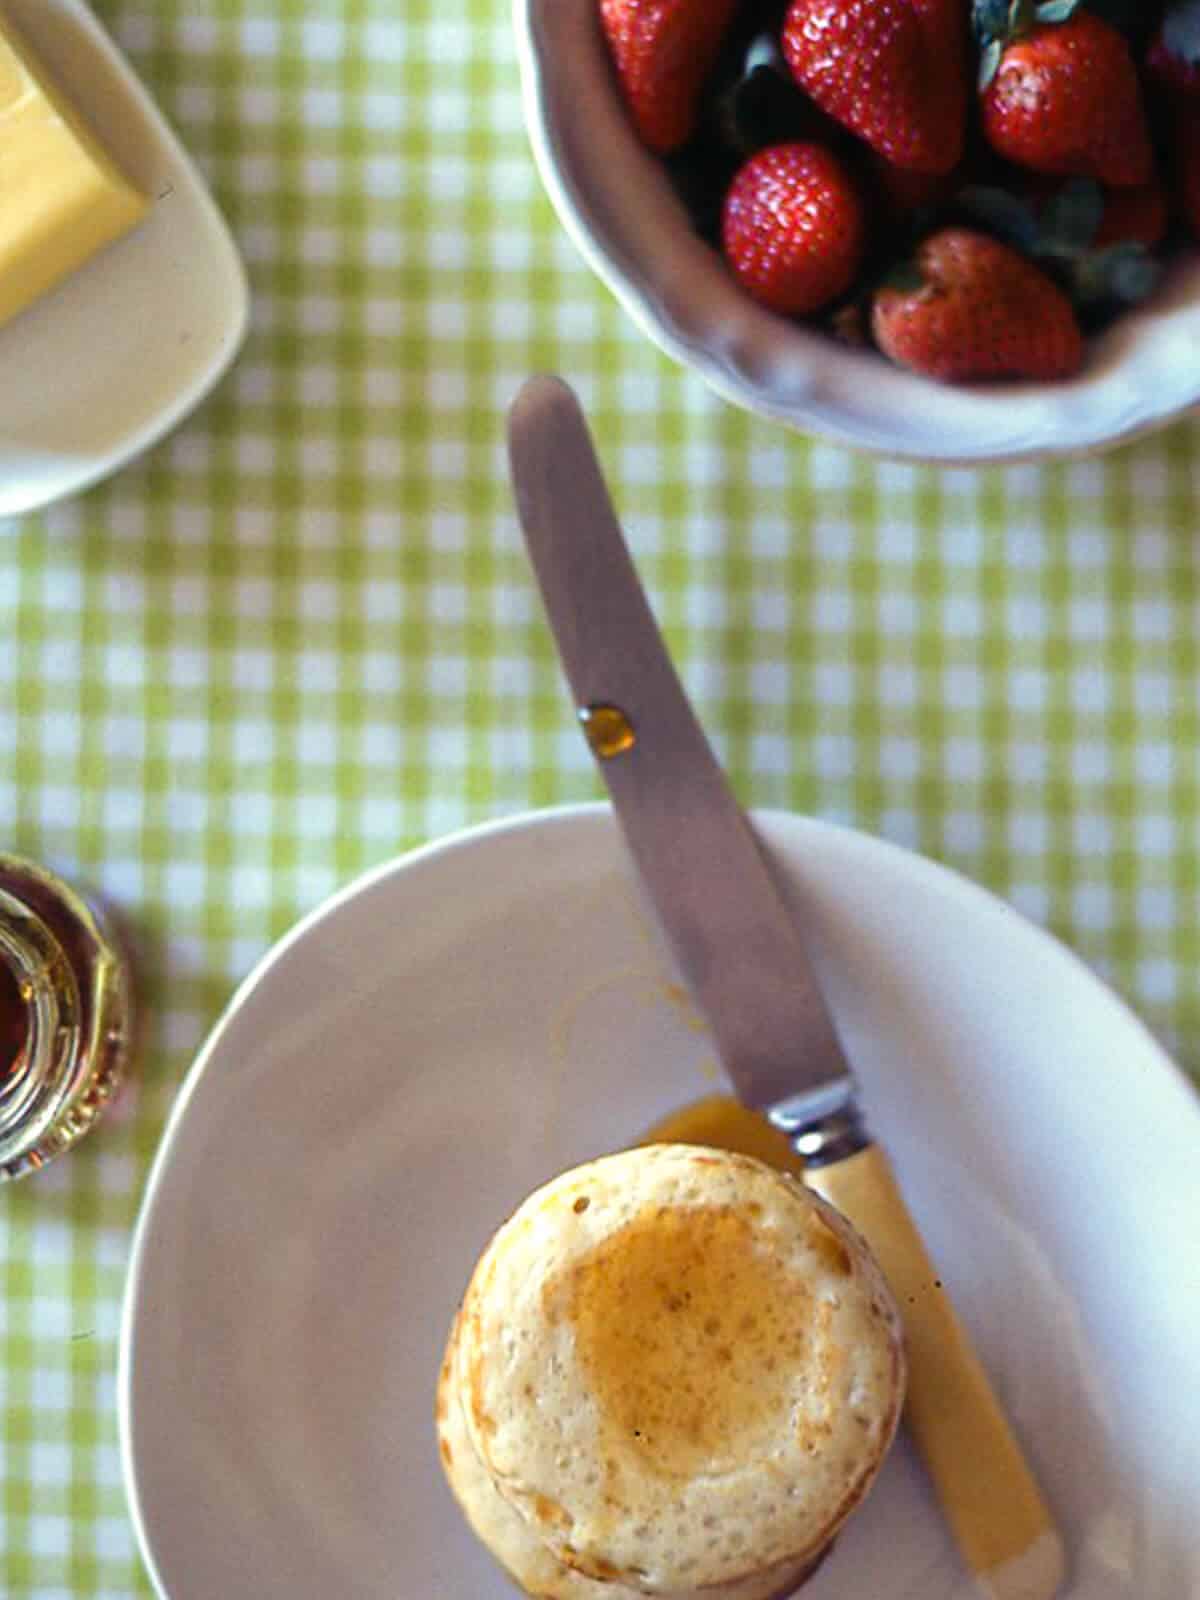 homemade crumpets served on a plate with a knife